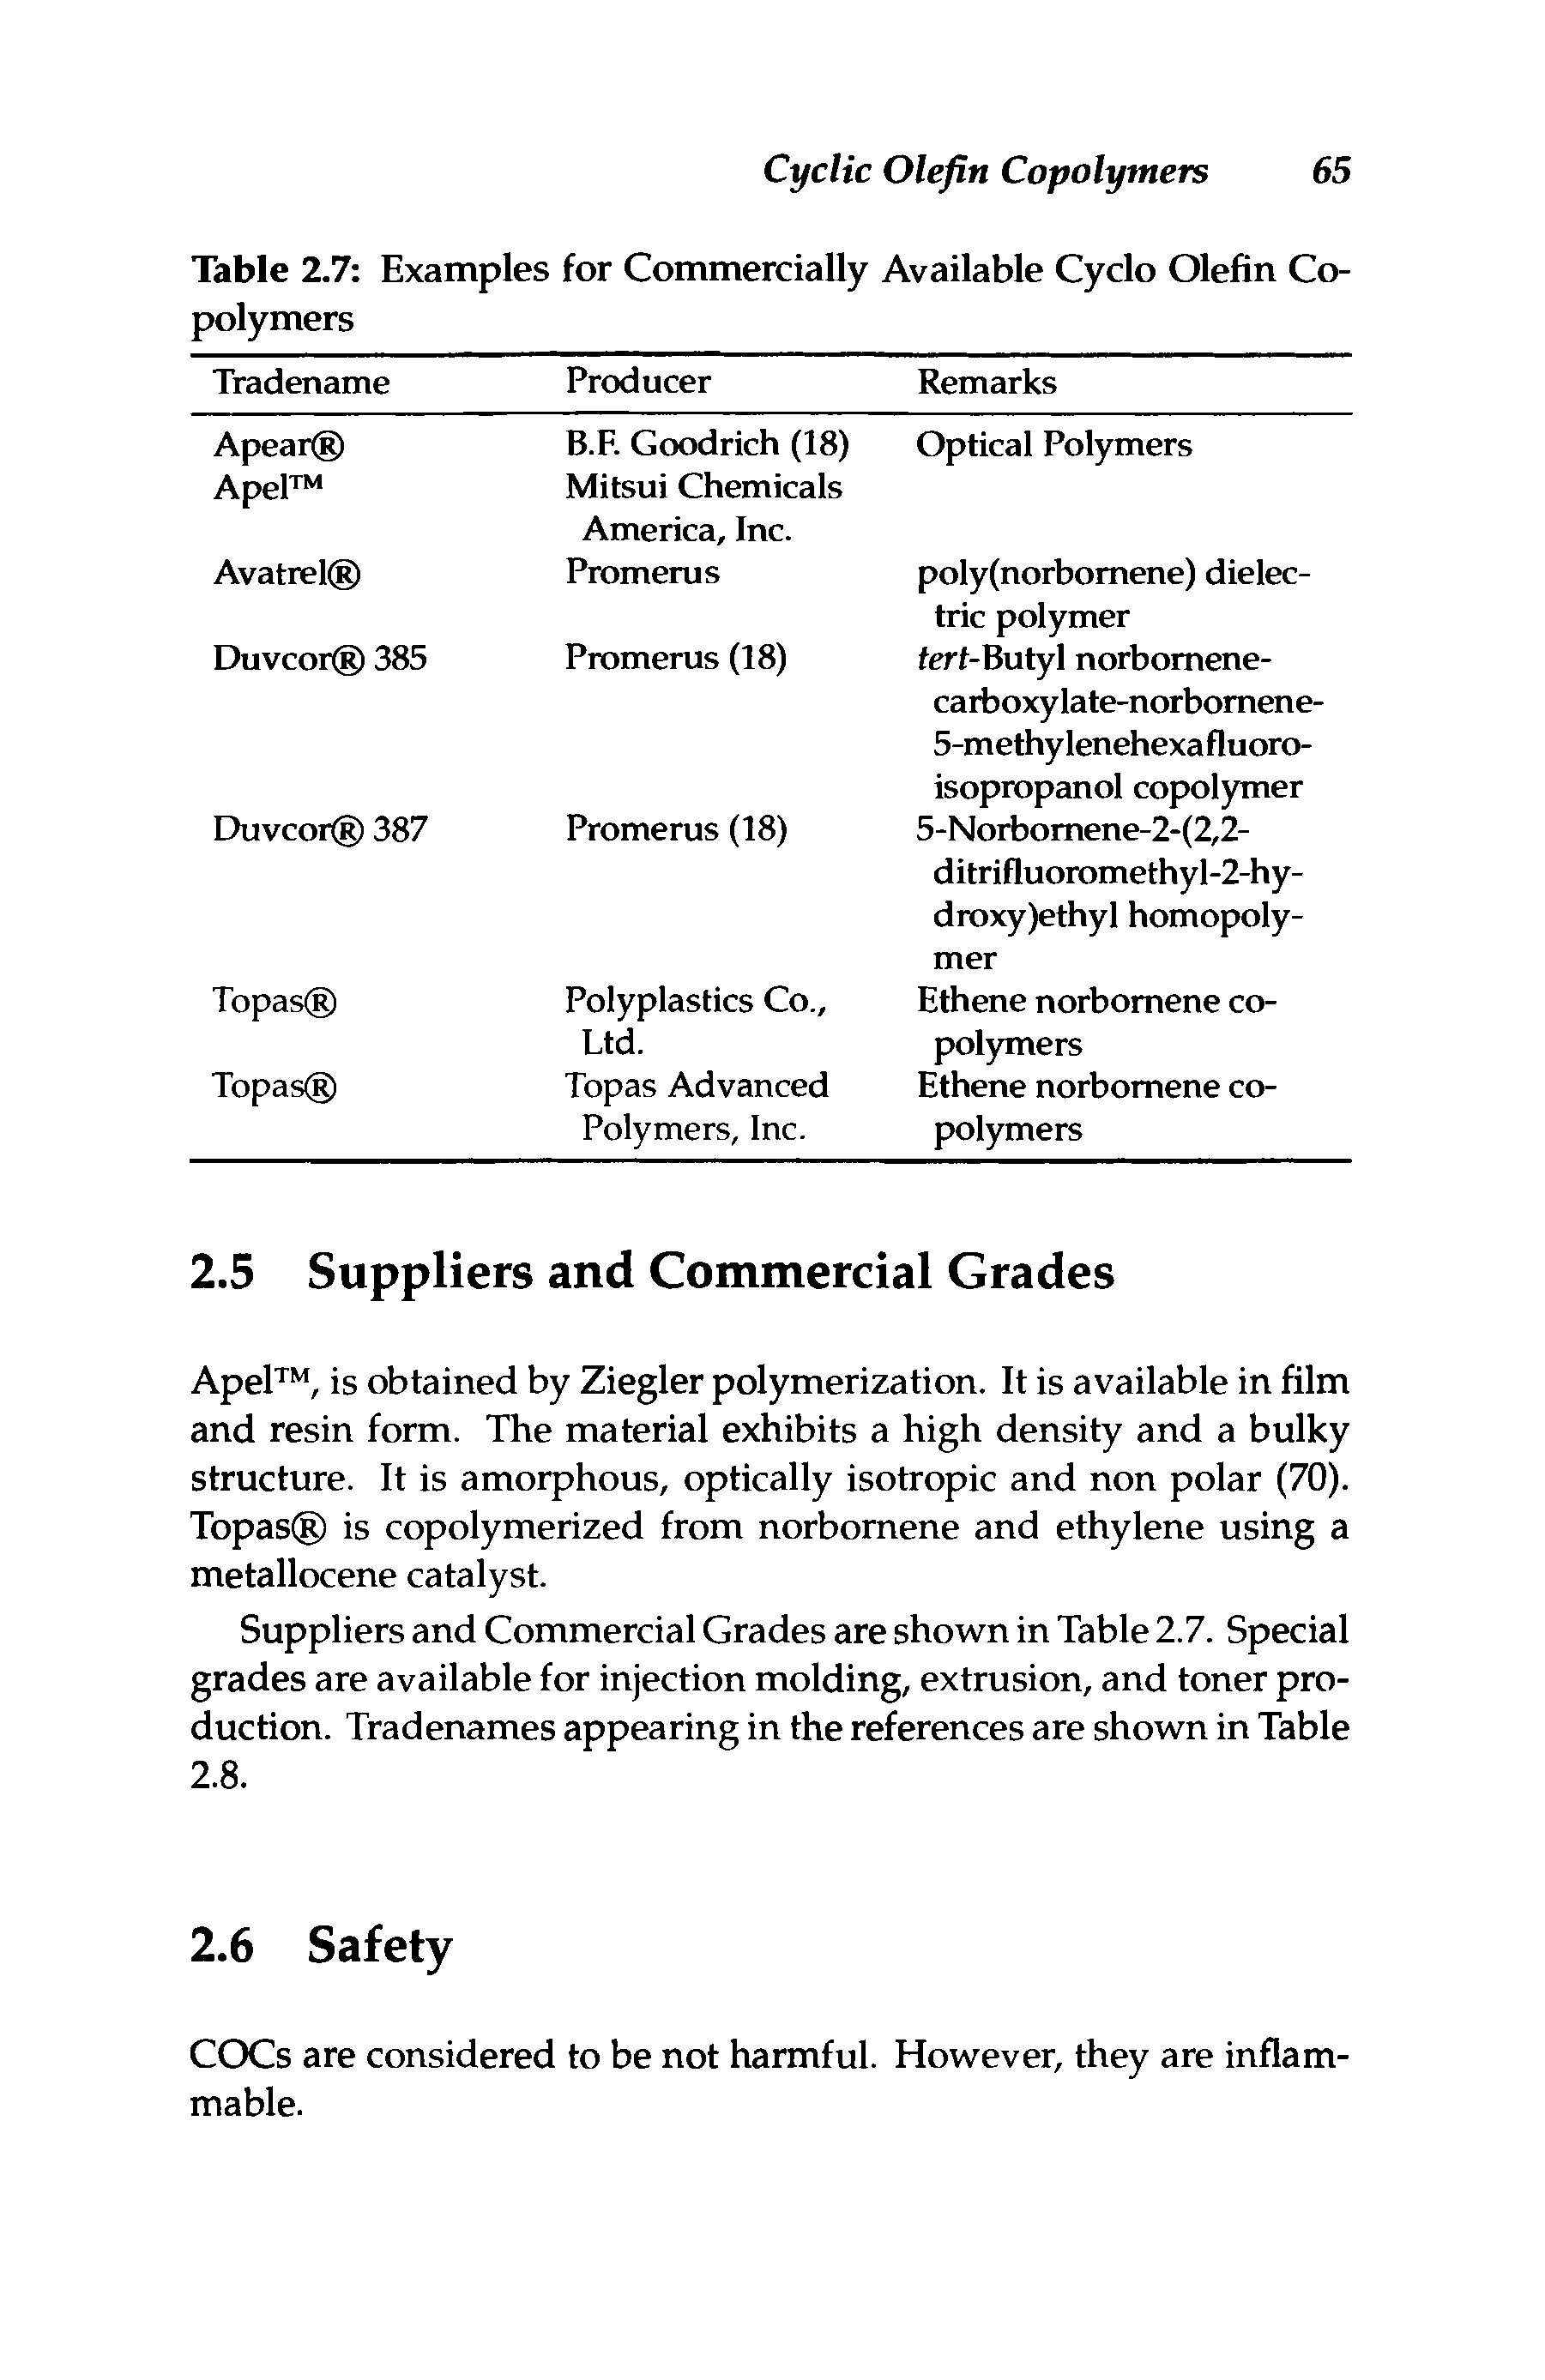 Table 2.7 Examples for Commercially Available Cyclo Olefin Copolymers...